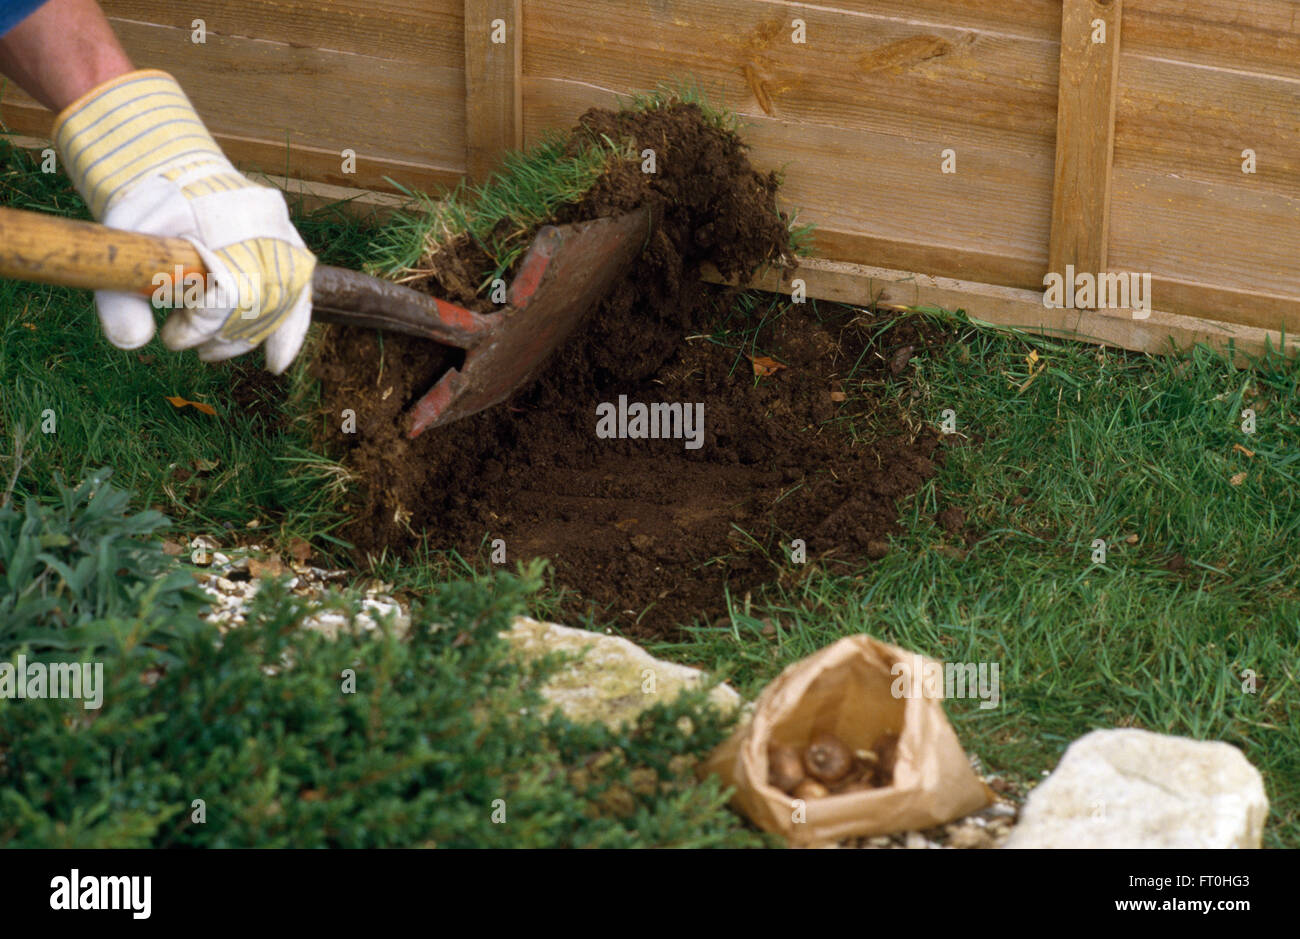 Close-up of hands digging up turf before planting bulbs Stock Photo